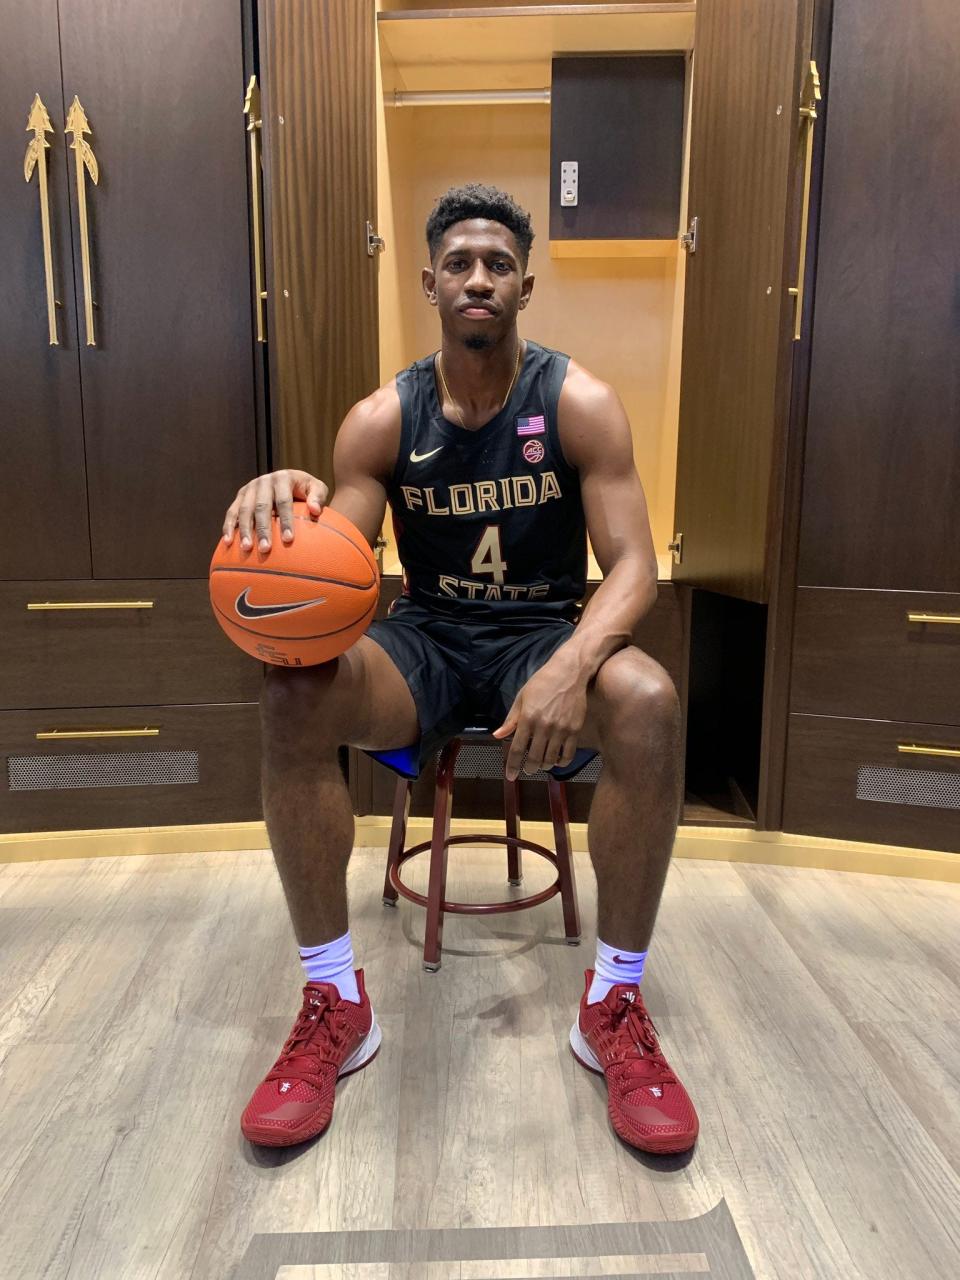 Sardaar Calhoun was the No. 3 junior college recruit in the country after two seasons at Missouri State West Plains. He signed with Florida State over several other offers.